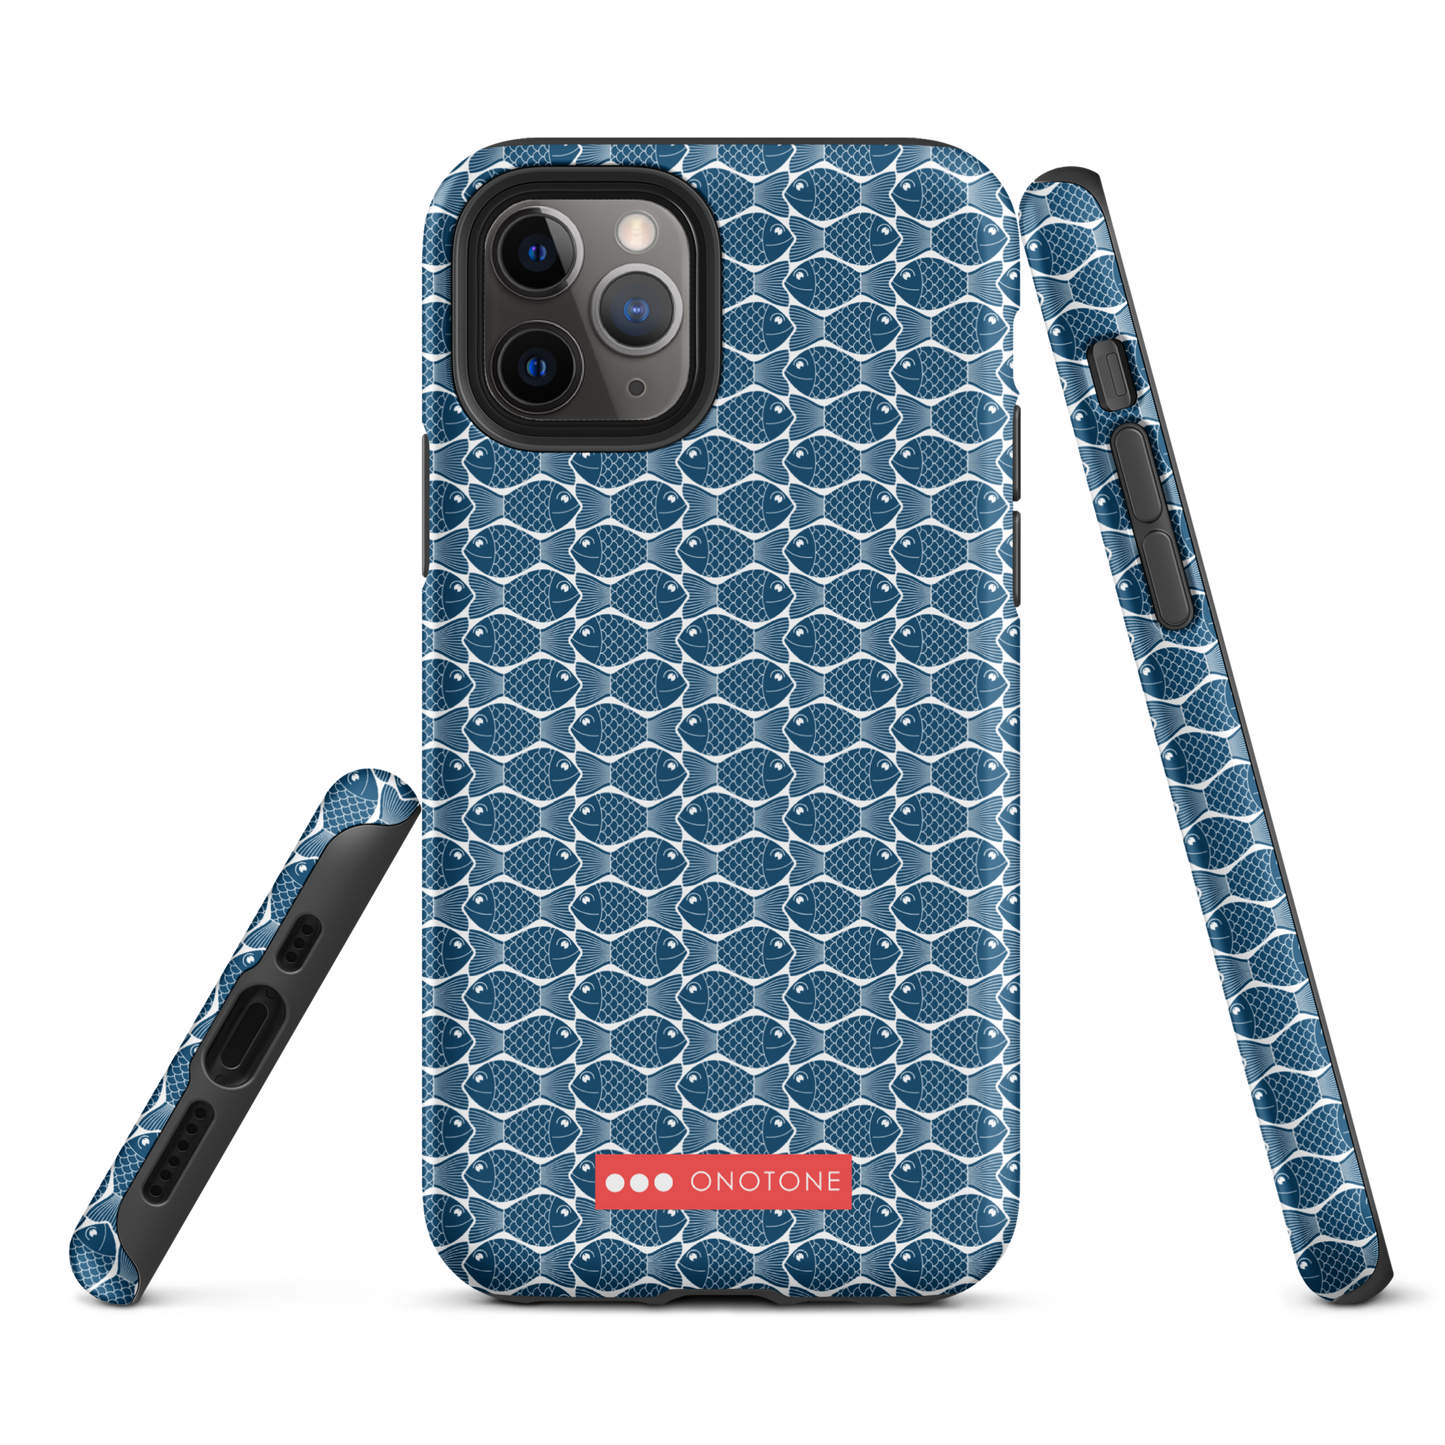 Japanese iPhone® Case with traditional Indigo fish patterns